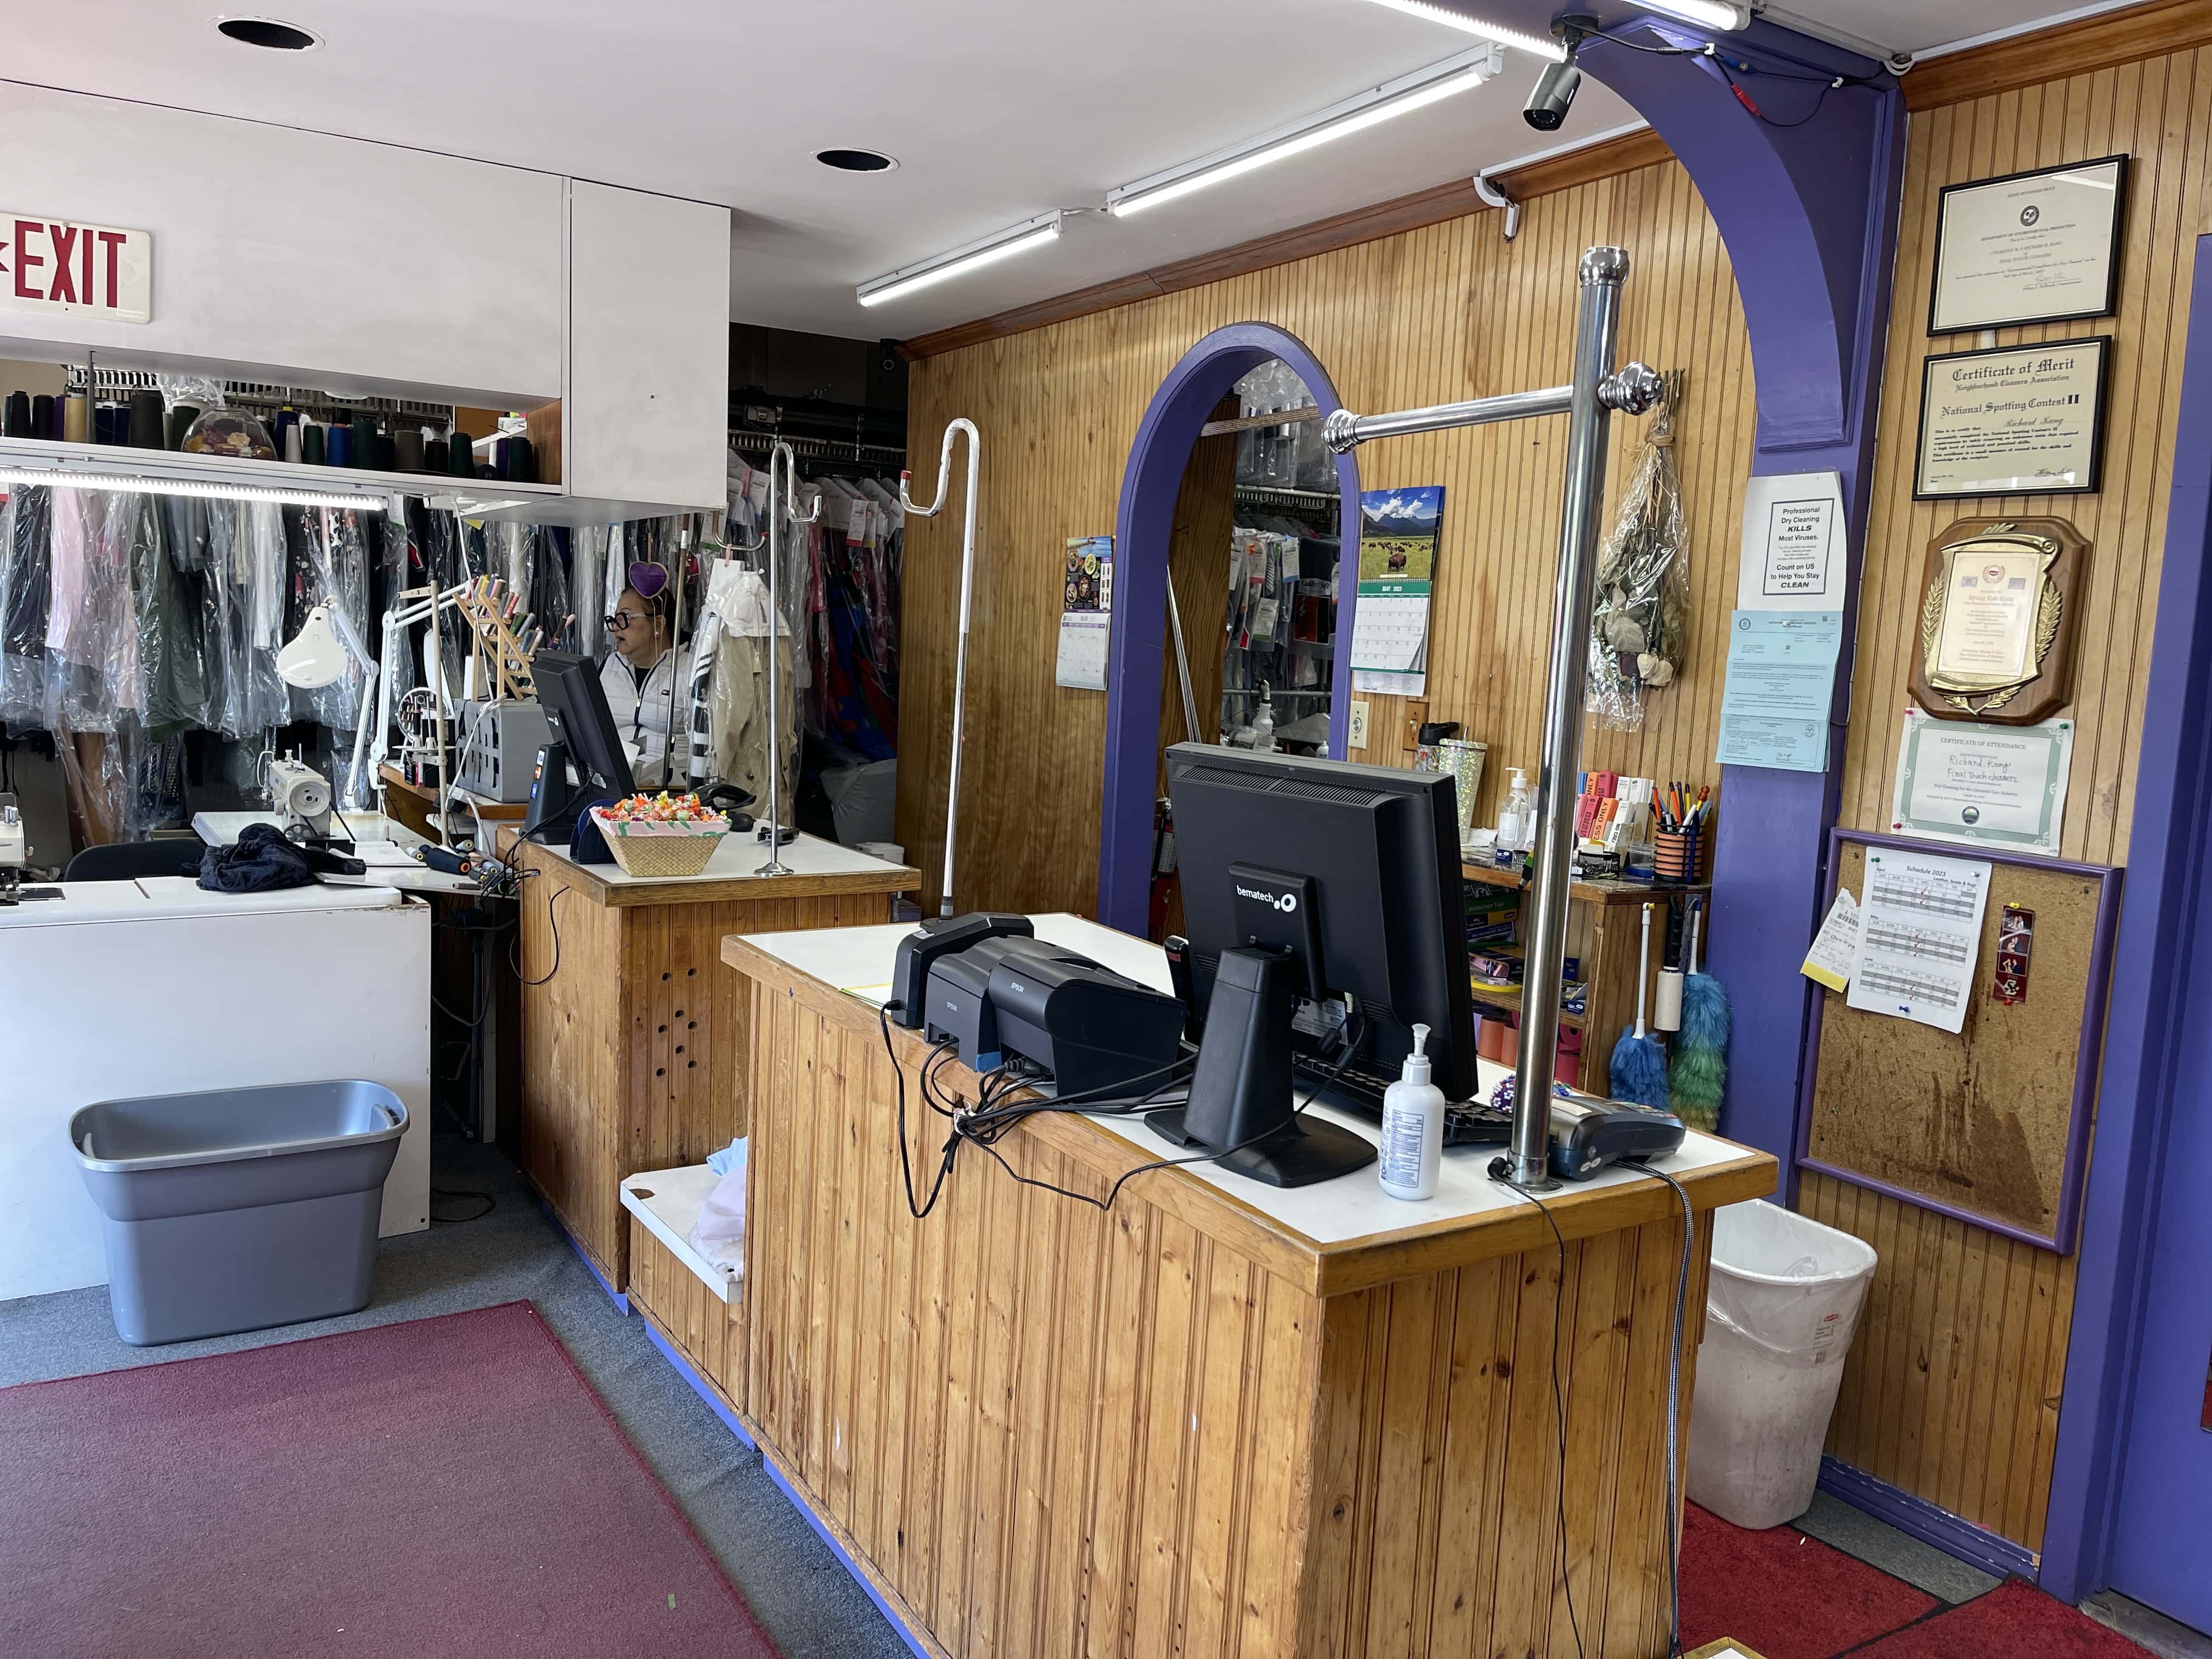 Final Touch Cleaners - Westport (CT 06880), US, dry cleaner